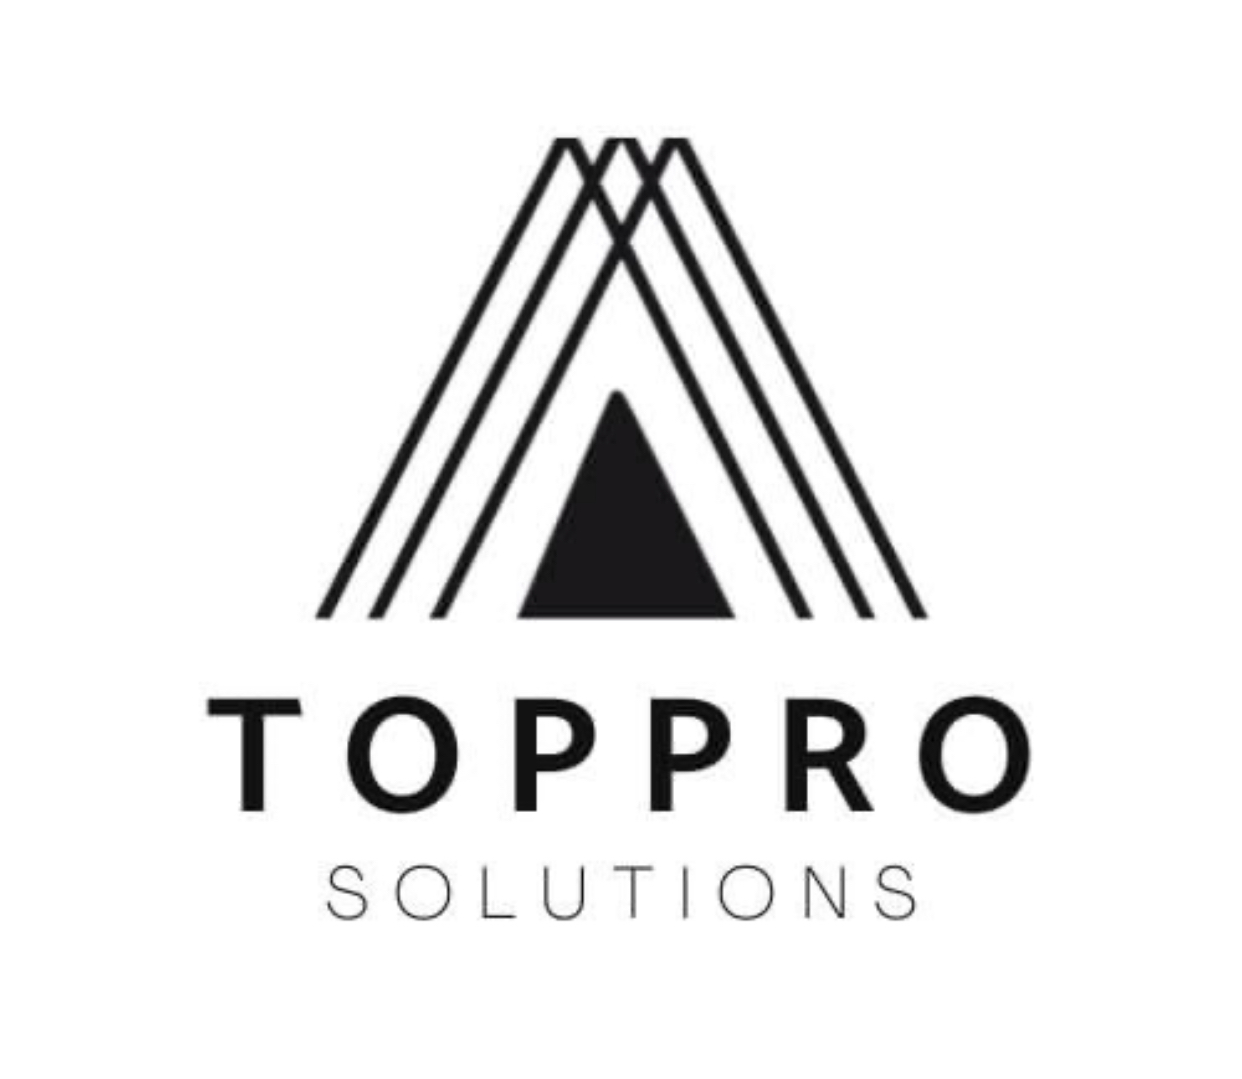 Toppro solutions